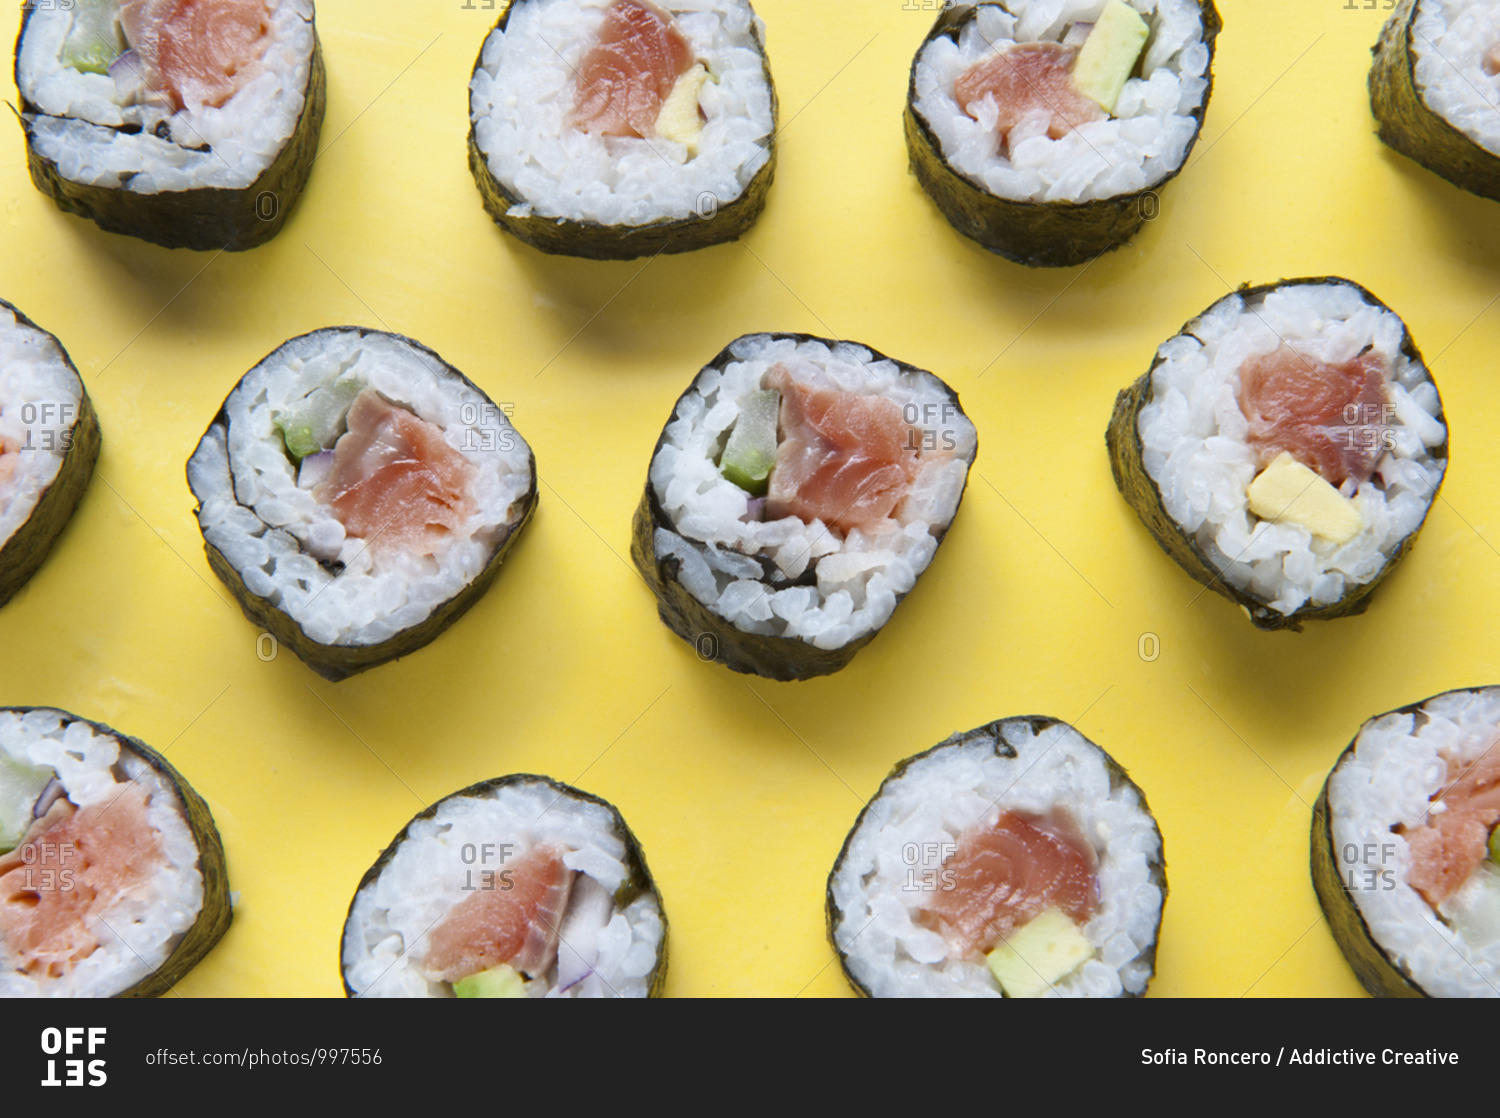 Top view of delicious sushi rolls with rice and salmon placed on colorful yellow table with chopsticks in studio